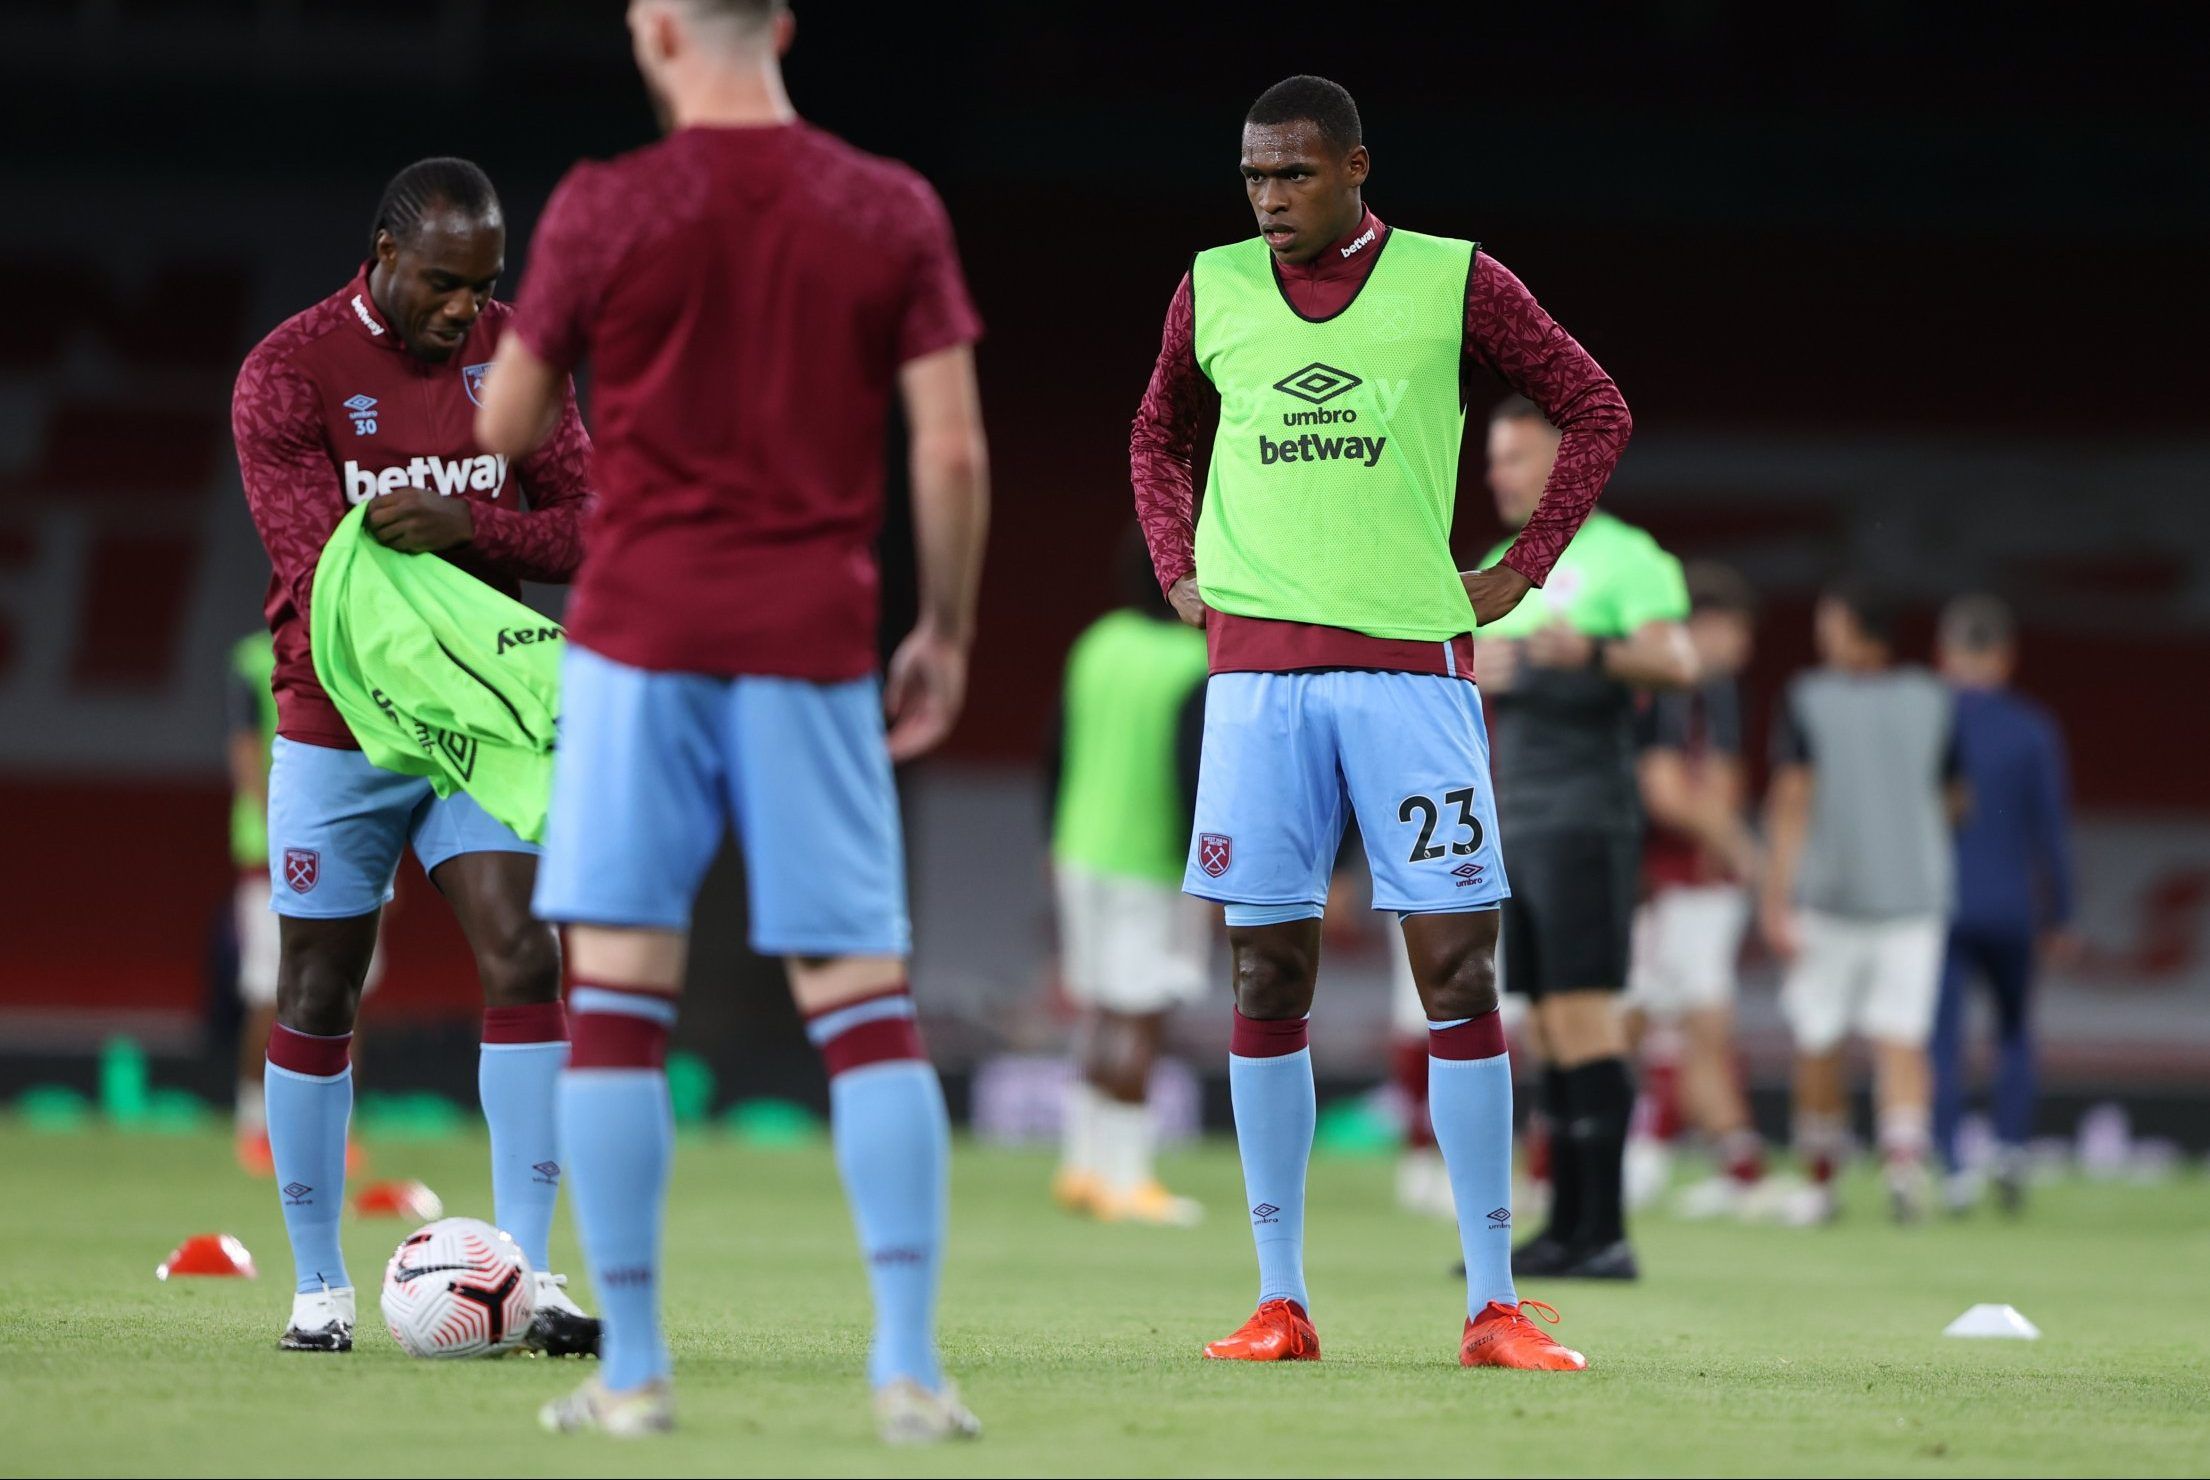 west ham defender issa diop looks on during warm up against arsenal in the premier league